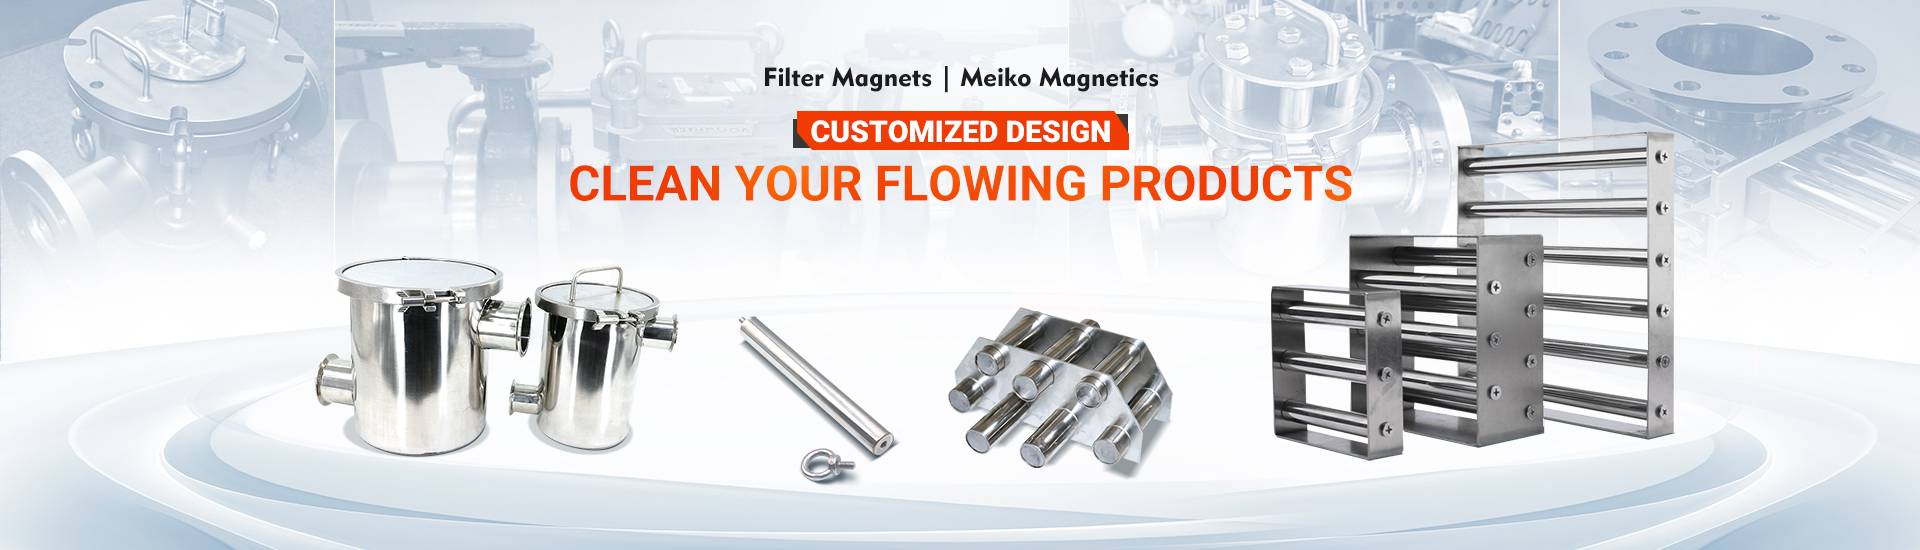 Magnetic Filtering System